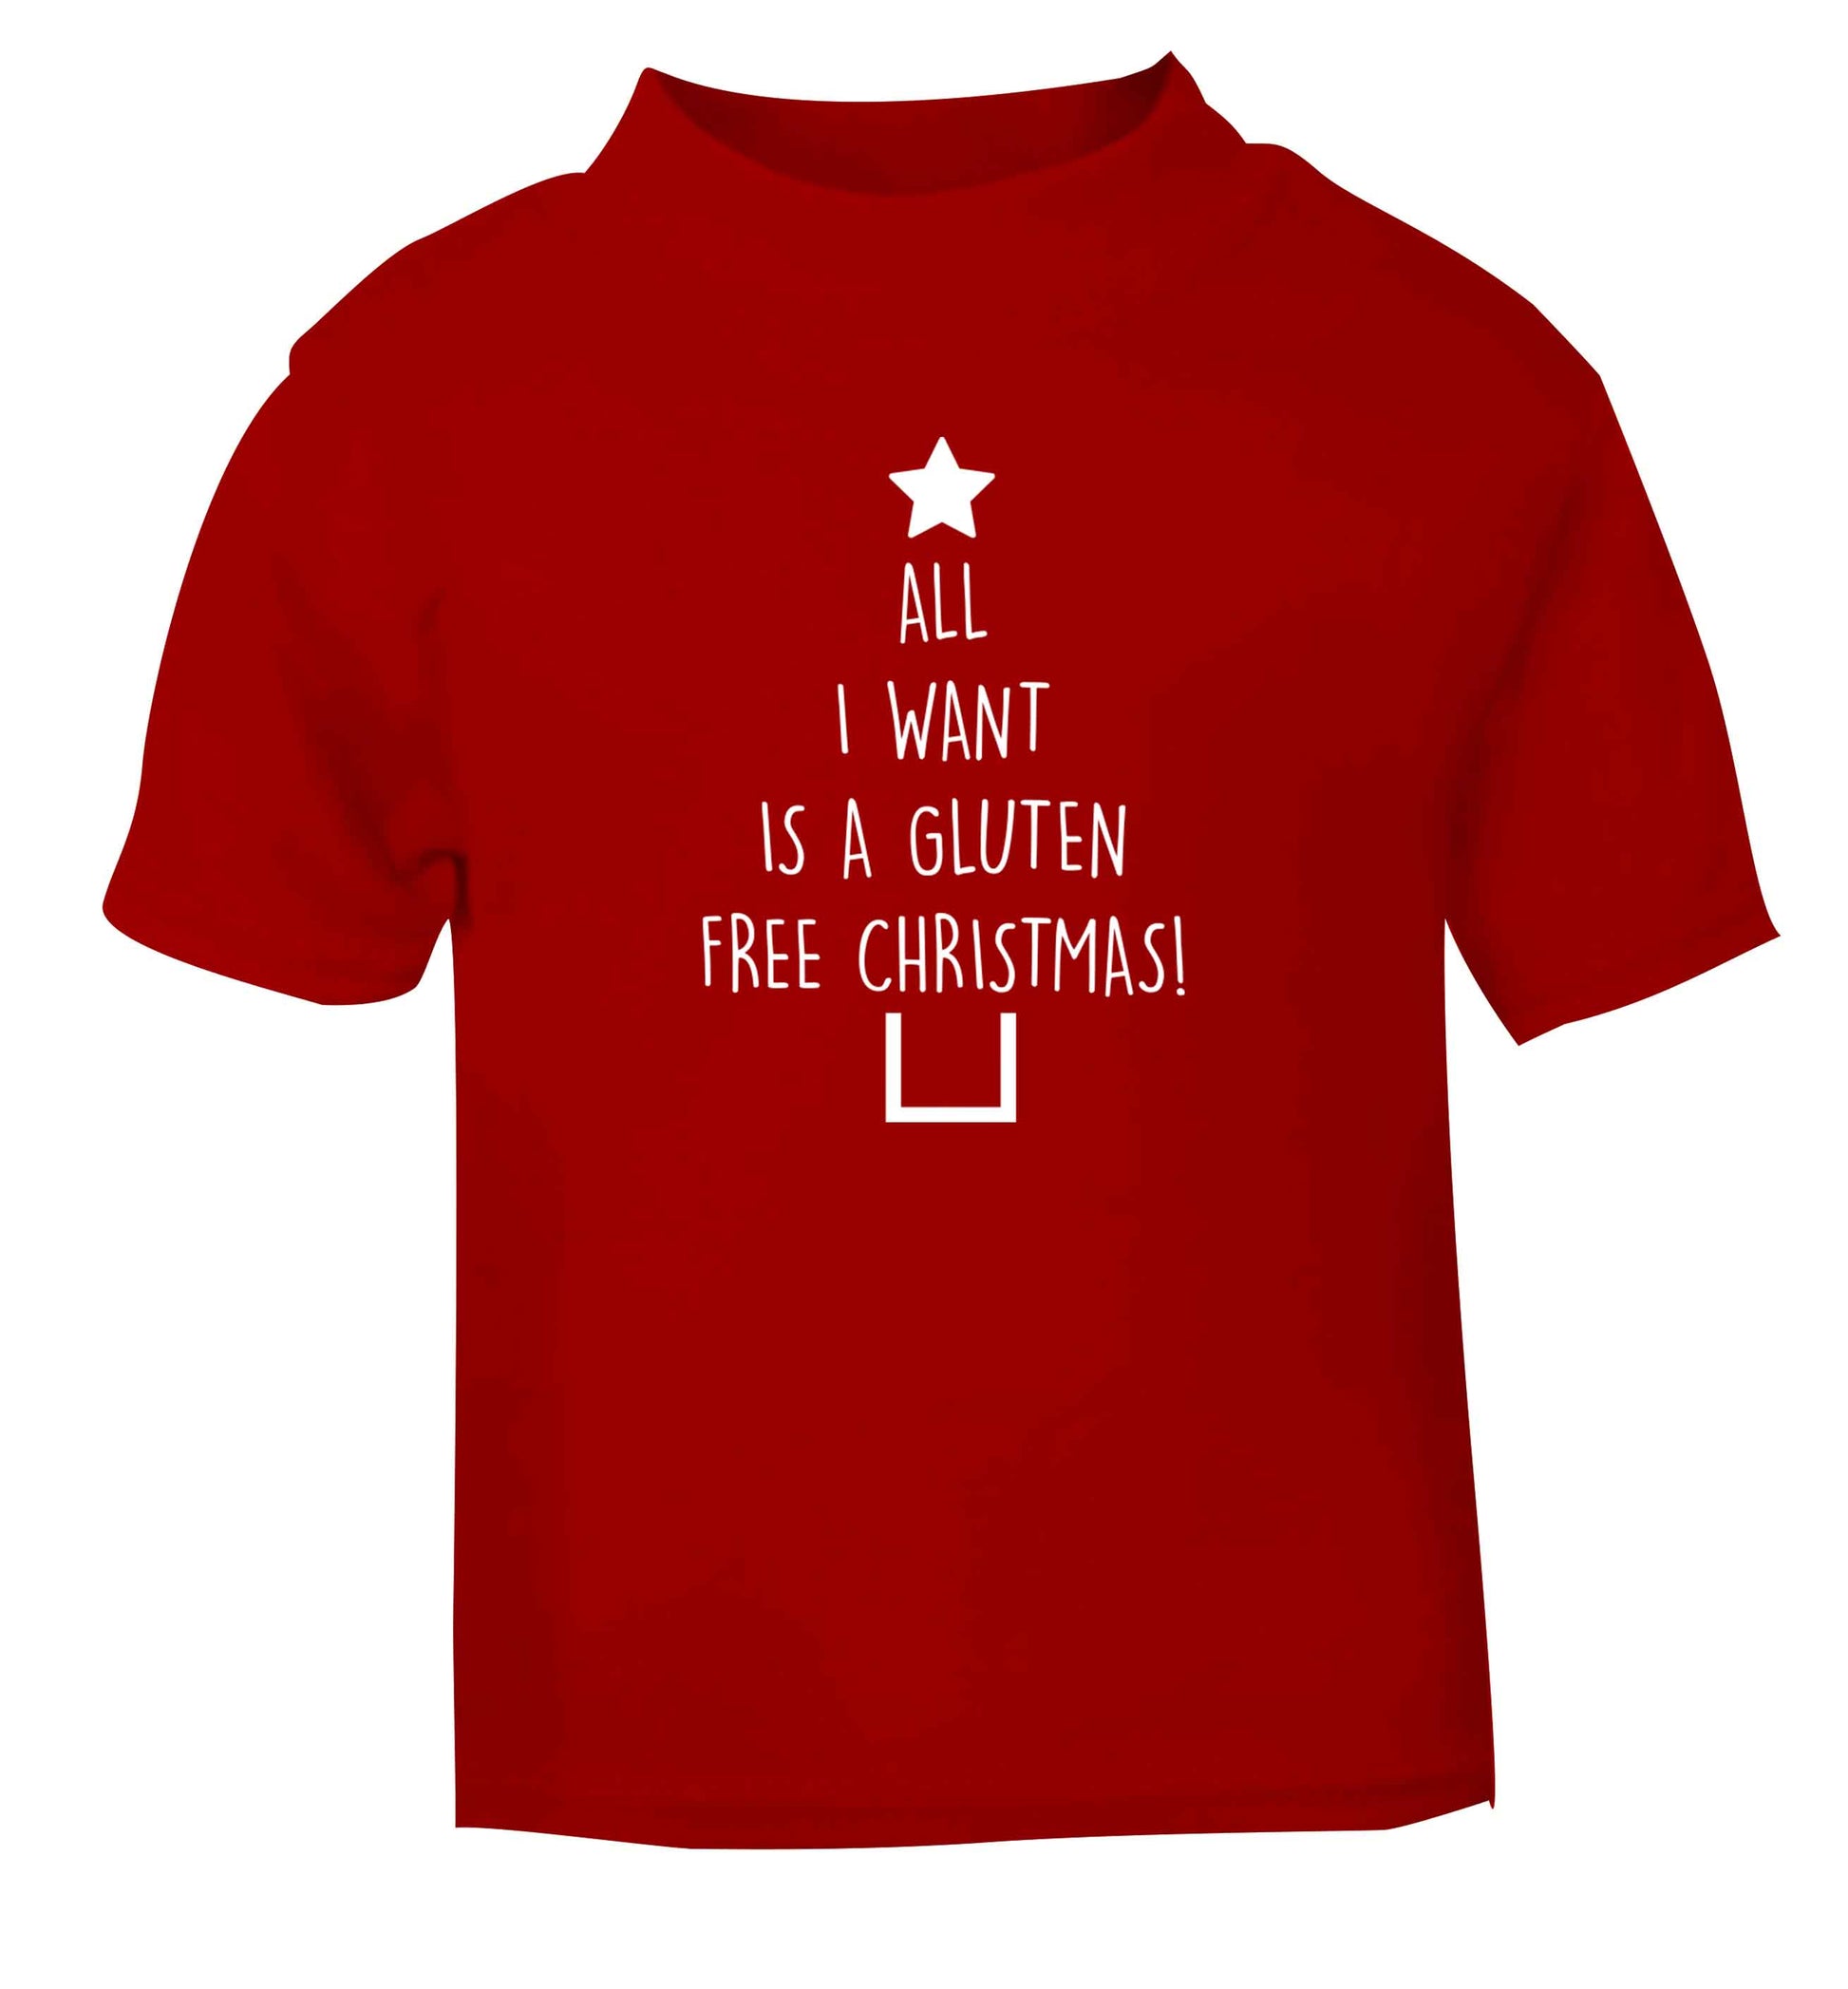 All I want is a gluten free Christmas red Baby Toddler Tshirt 2 Years